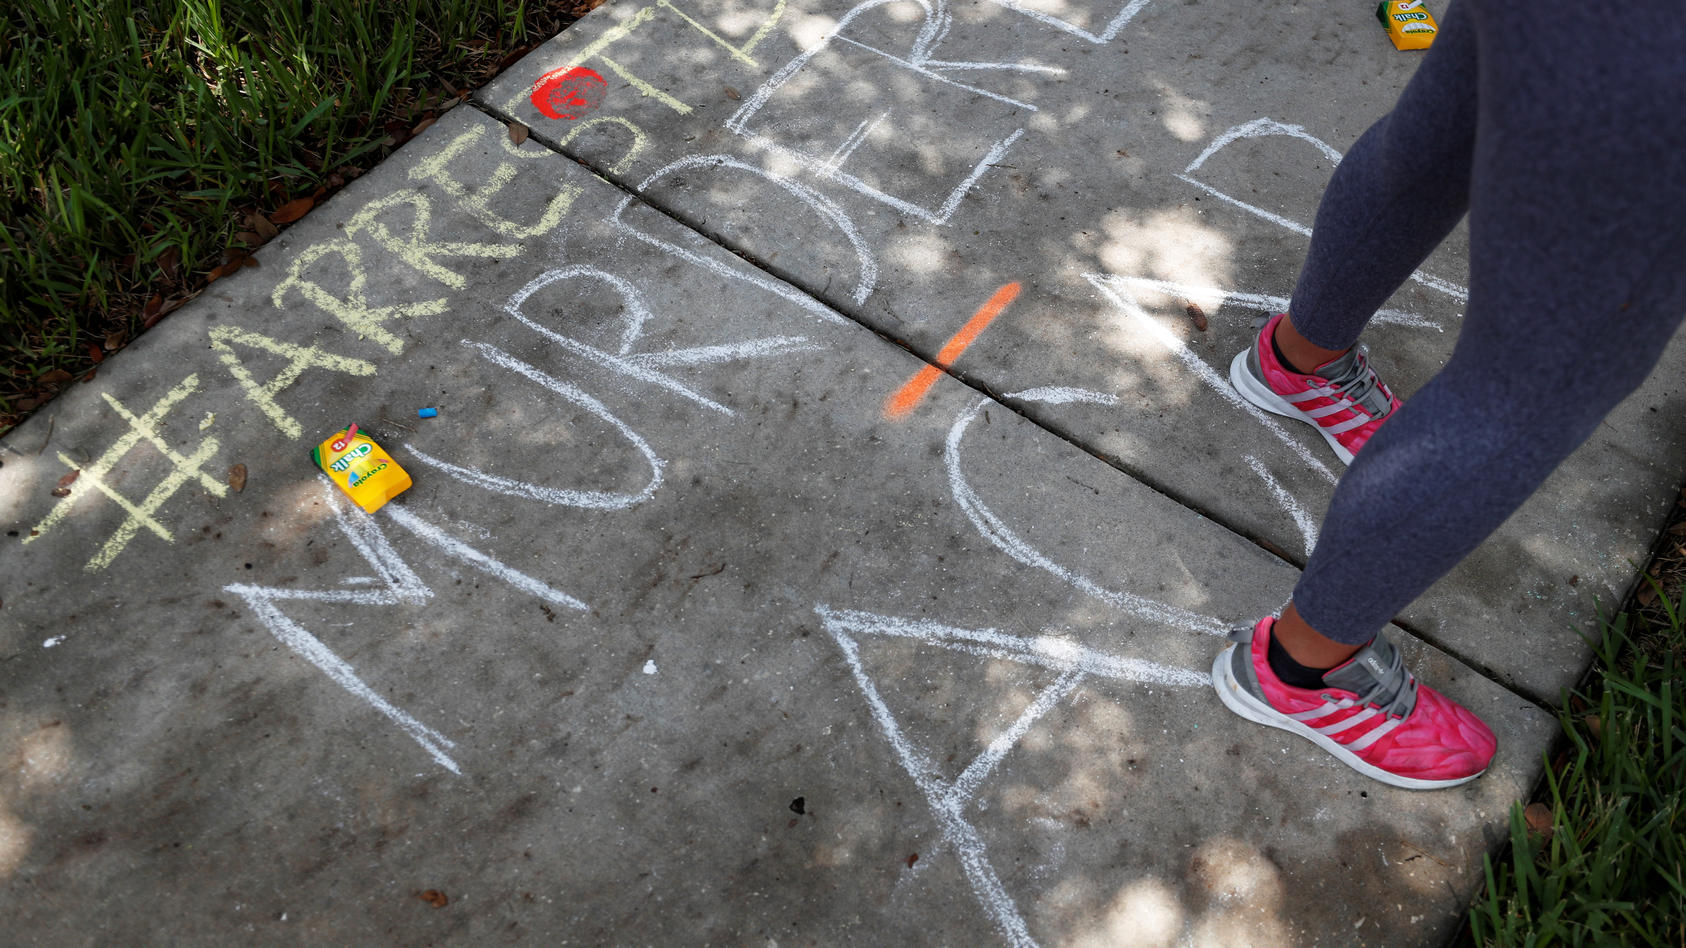 Chalk markings done by protesters cover the sidewalk outside the Florida home of former Minneapolis police officer Derek Chauvin, in Orlando